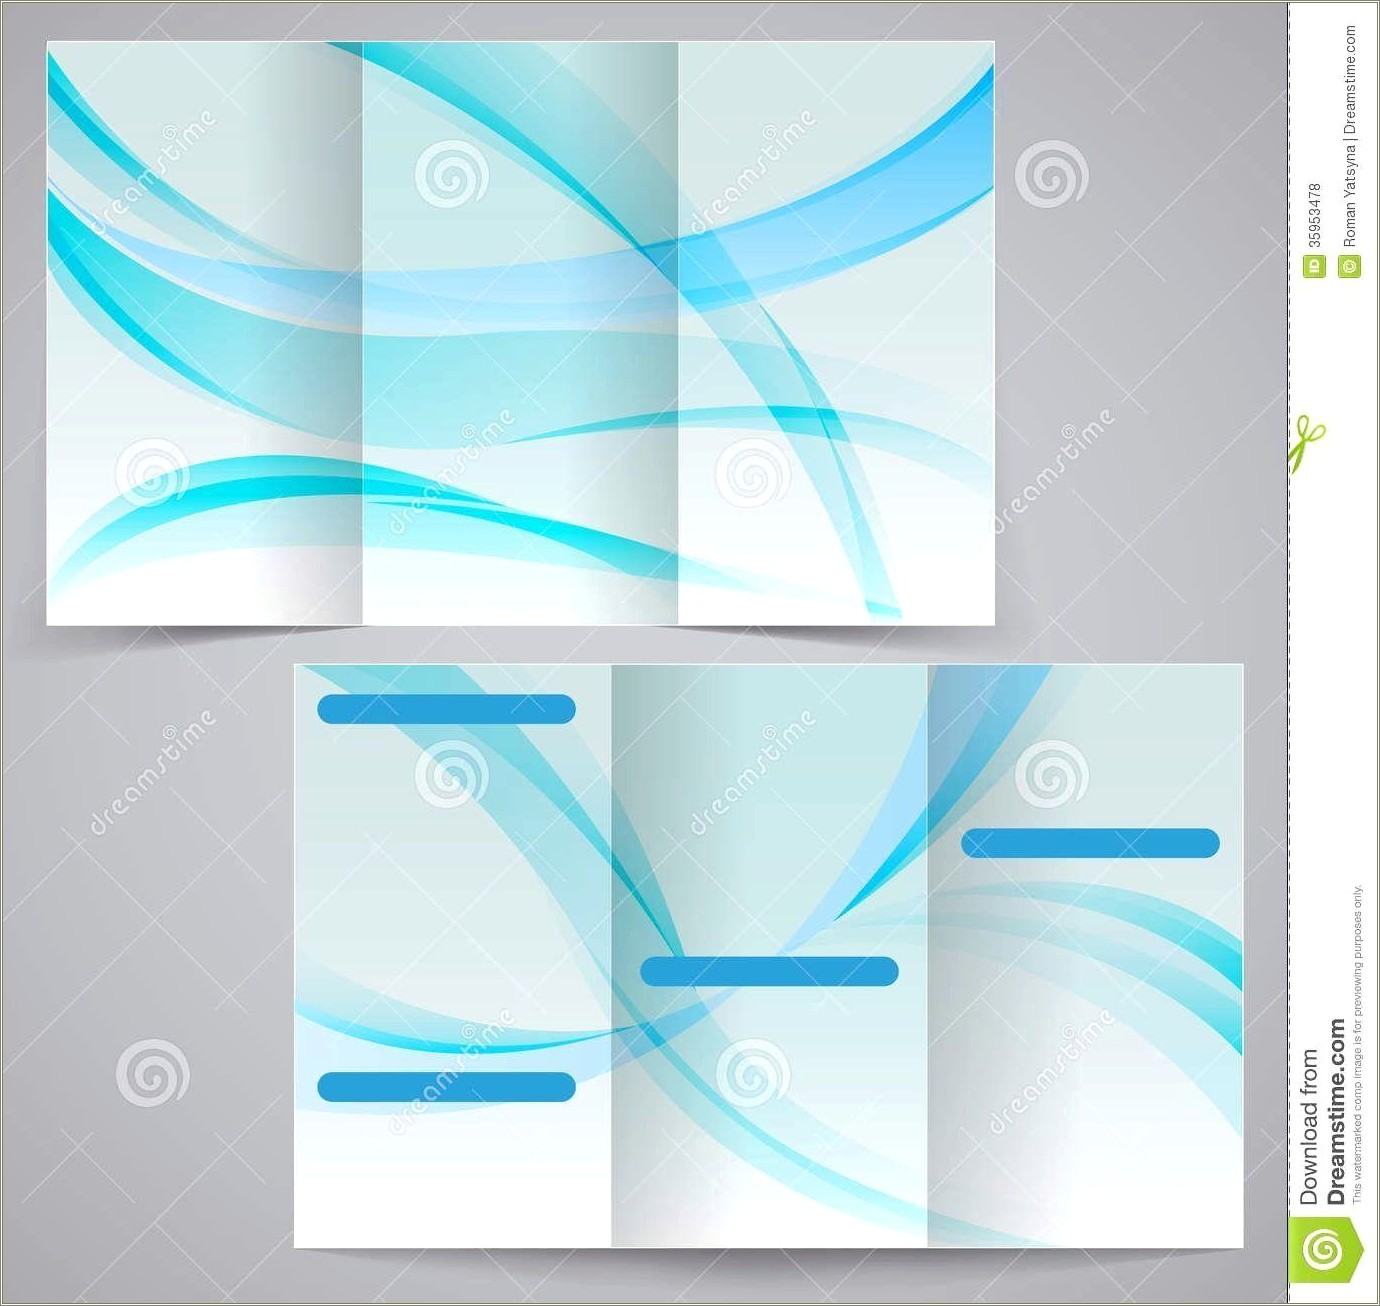 Brochure Templates Free Download For Microsoft Word 2010